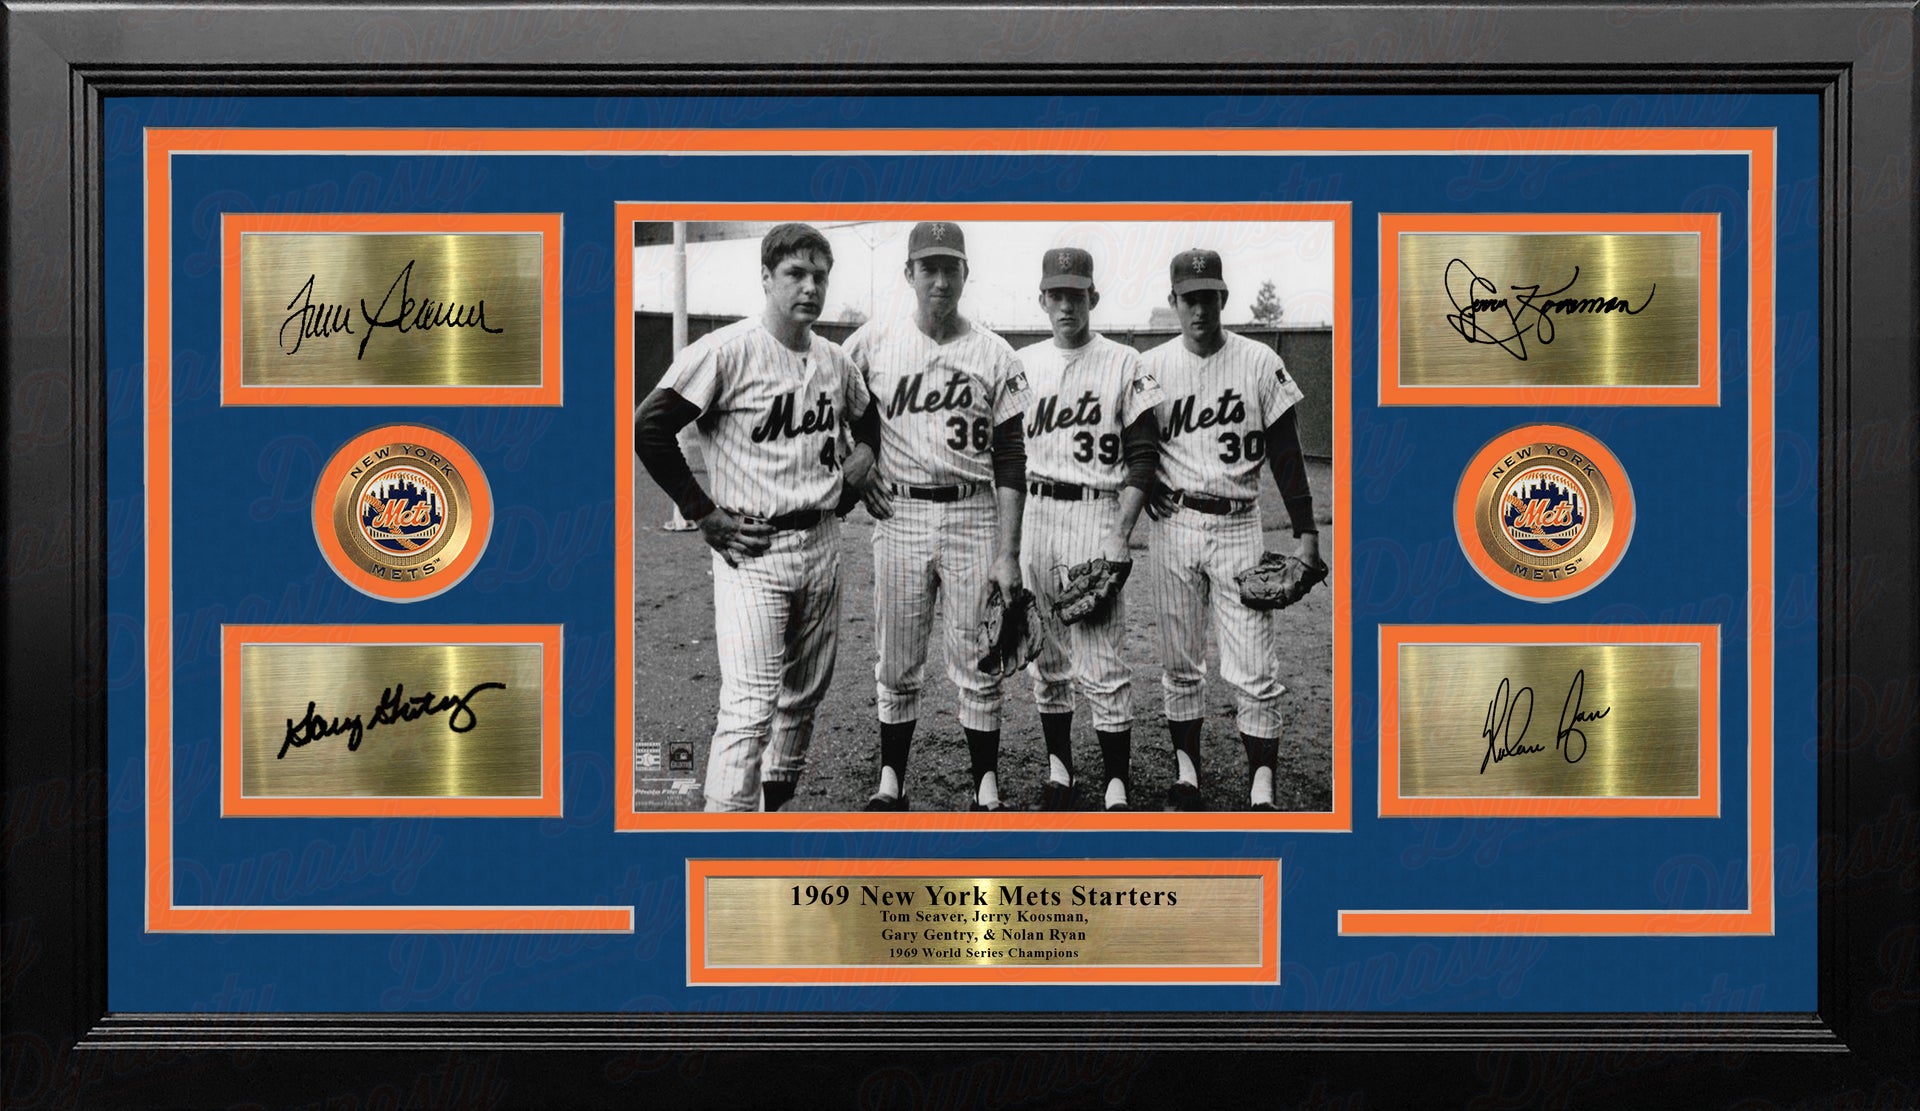 New York Mets 1969 Pitchers 8x10 Framed Photo with Engraved